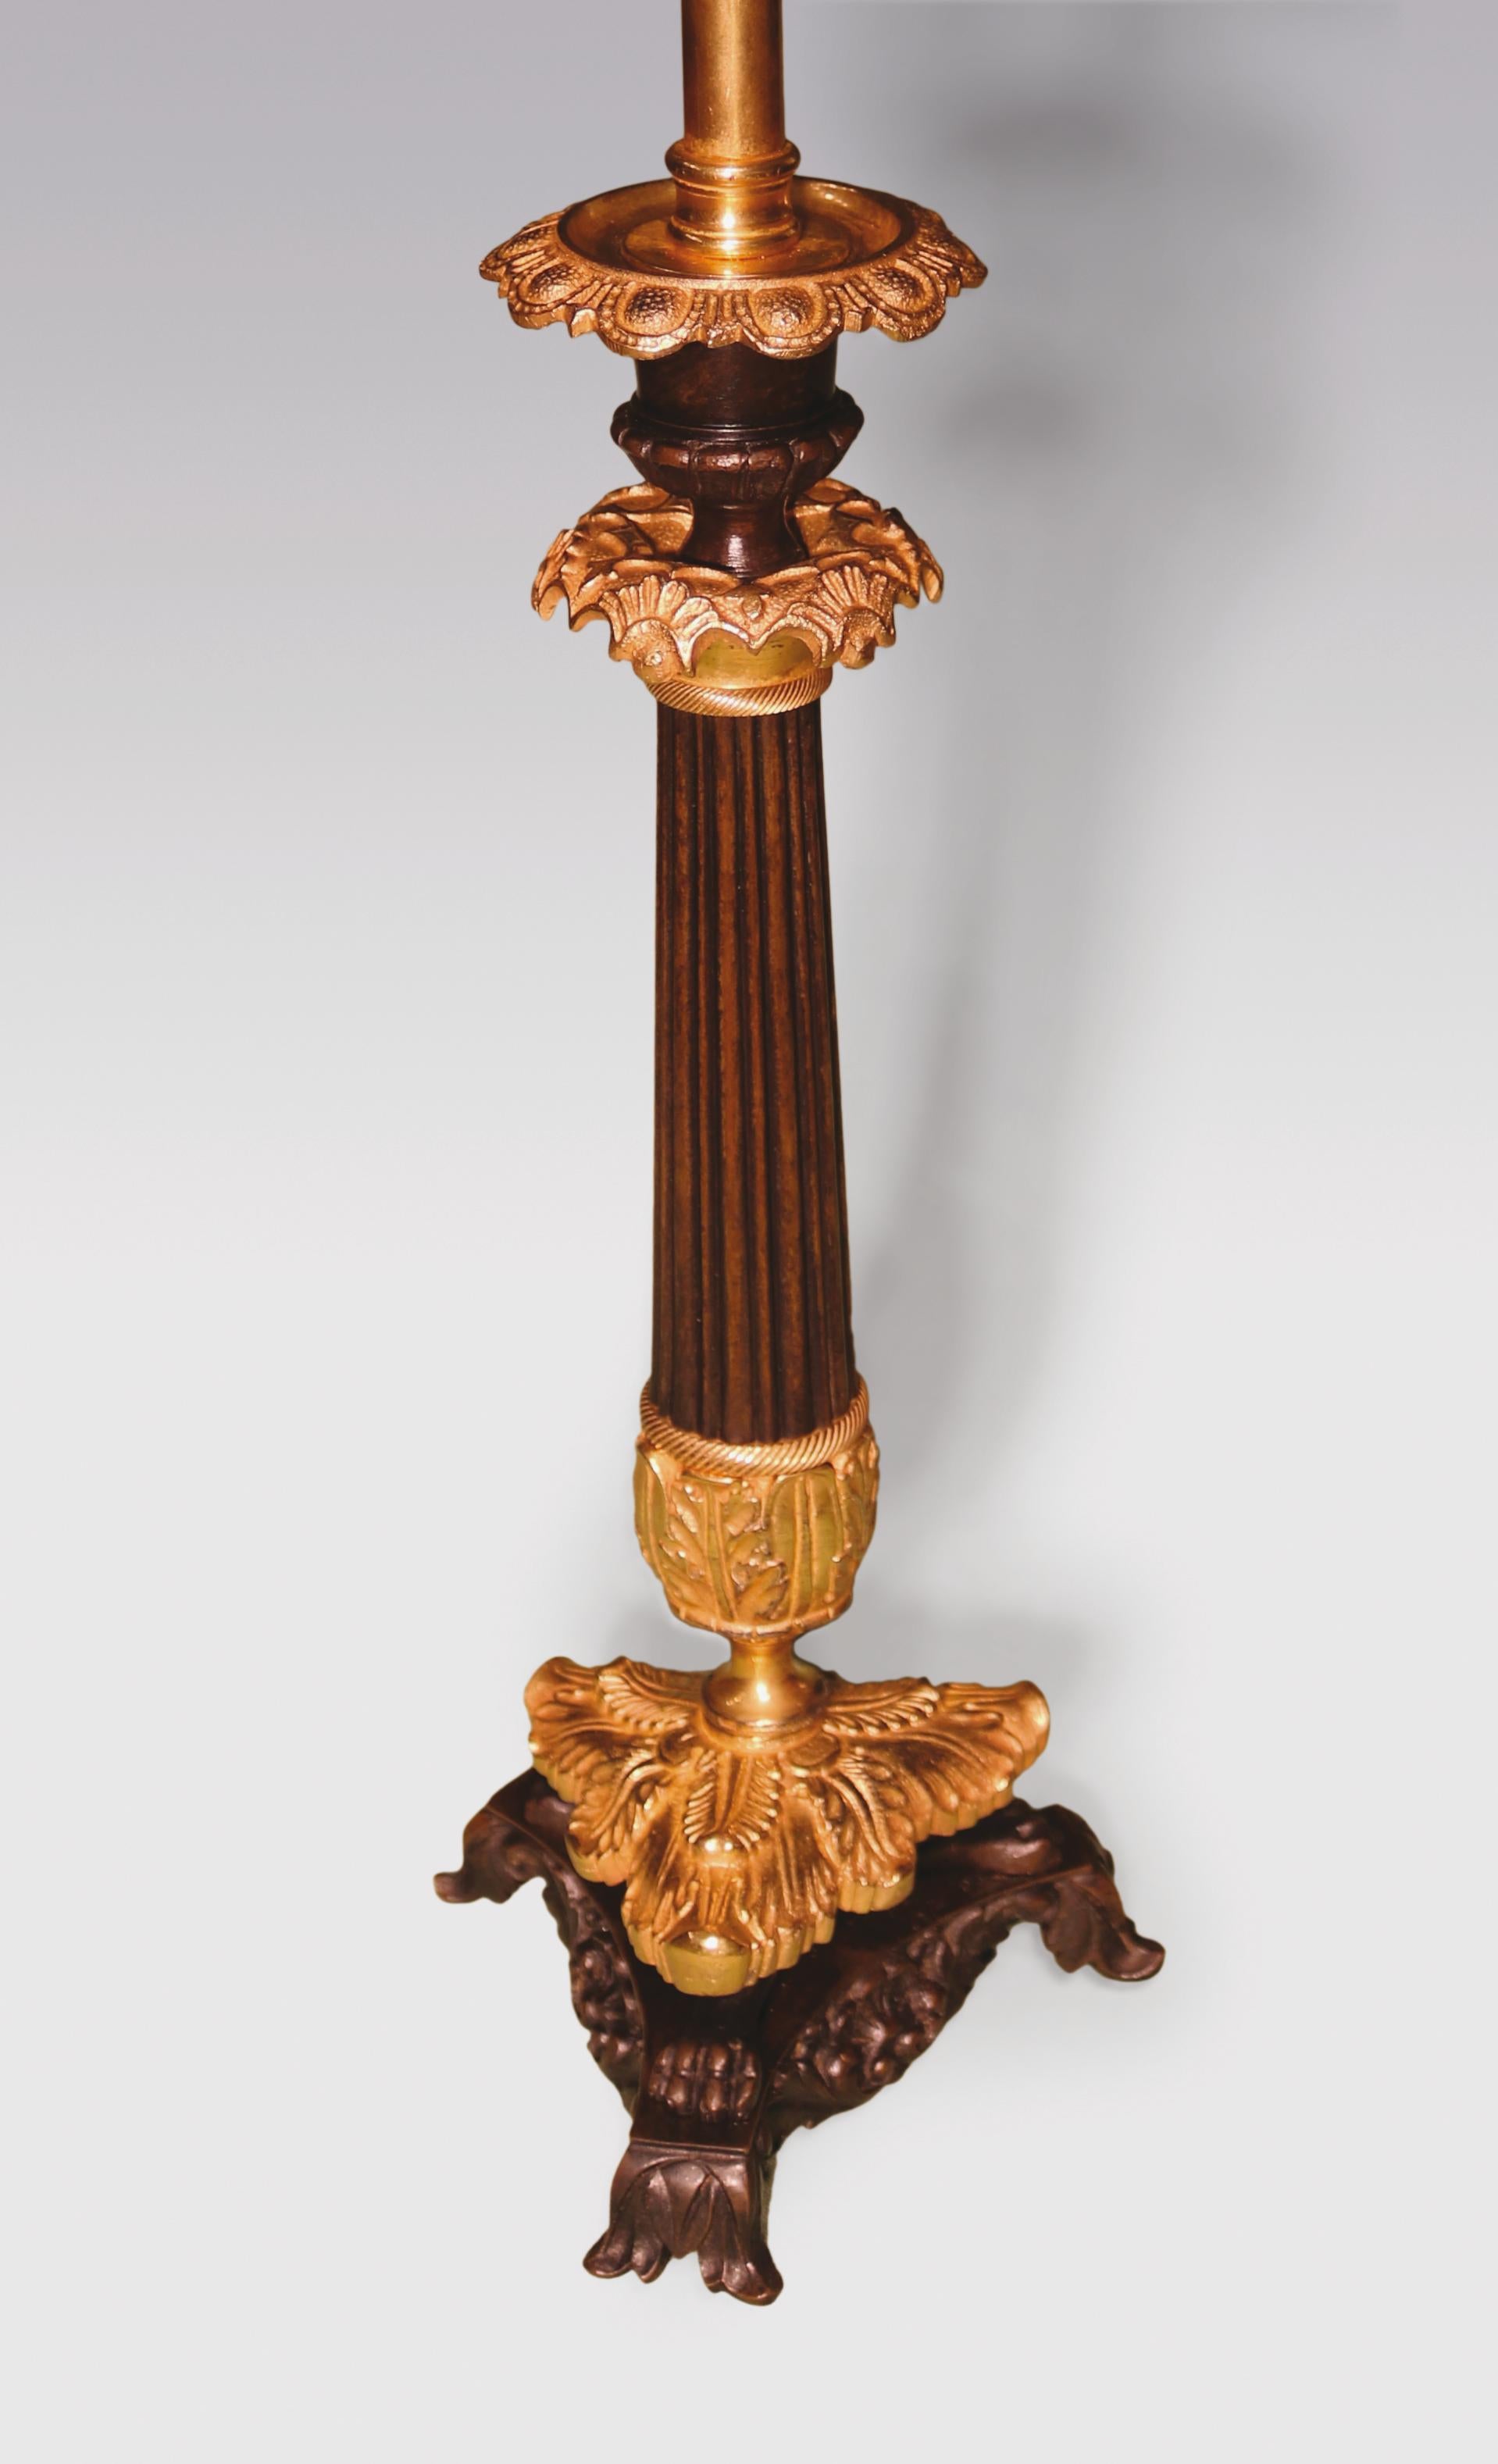 A pair of mid-19th century bronze and ormolu candlesticks, having petal shaped sconces above reeded tapering stems supported on acanthus decorated lion's paw triangular plinth bases ending on leaf scroll feet. (Now converted to lamps).